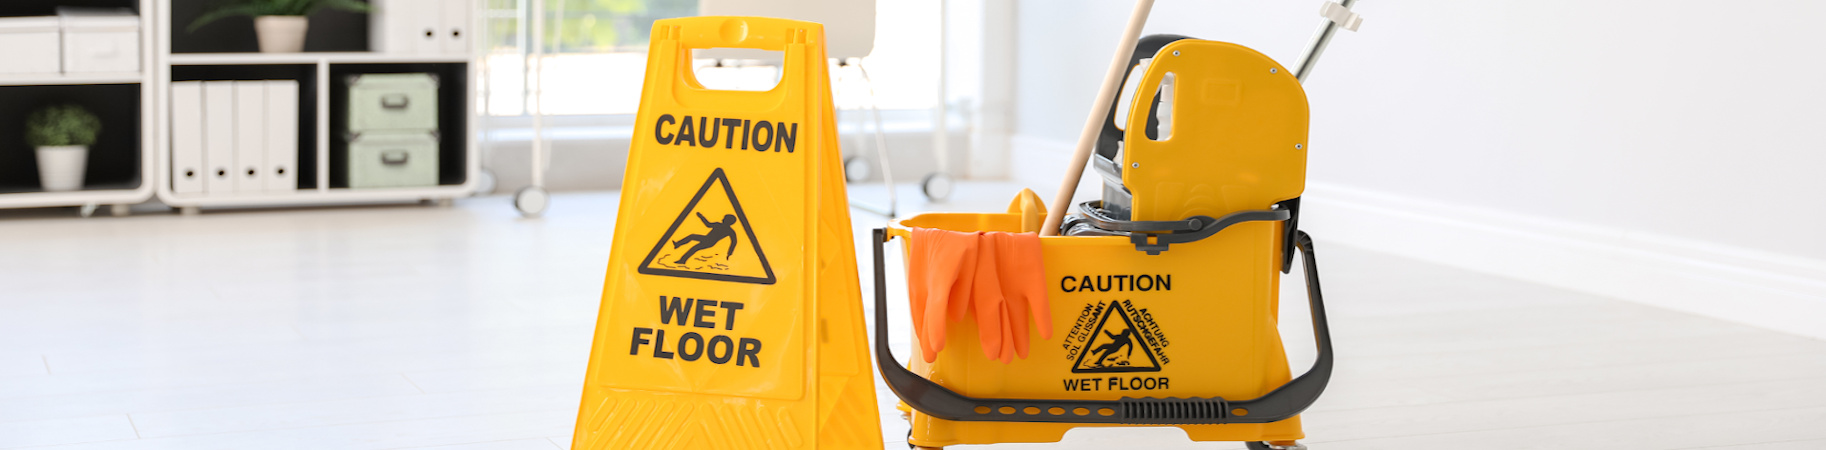 A janitorial mop bucket with a wet floor caution sign next to it